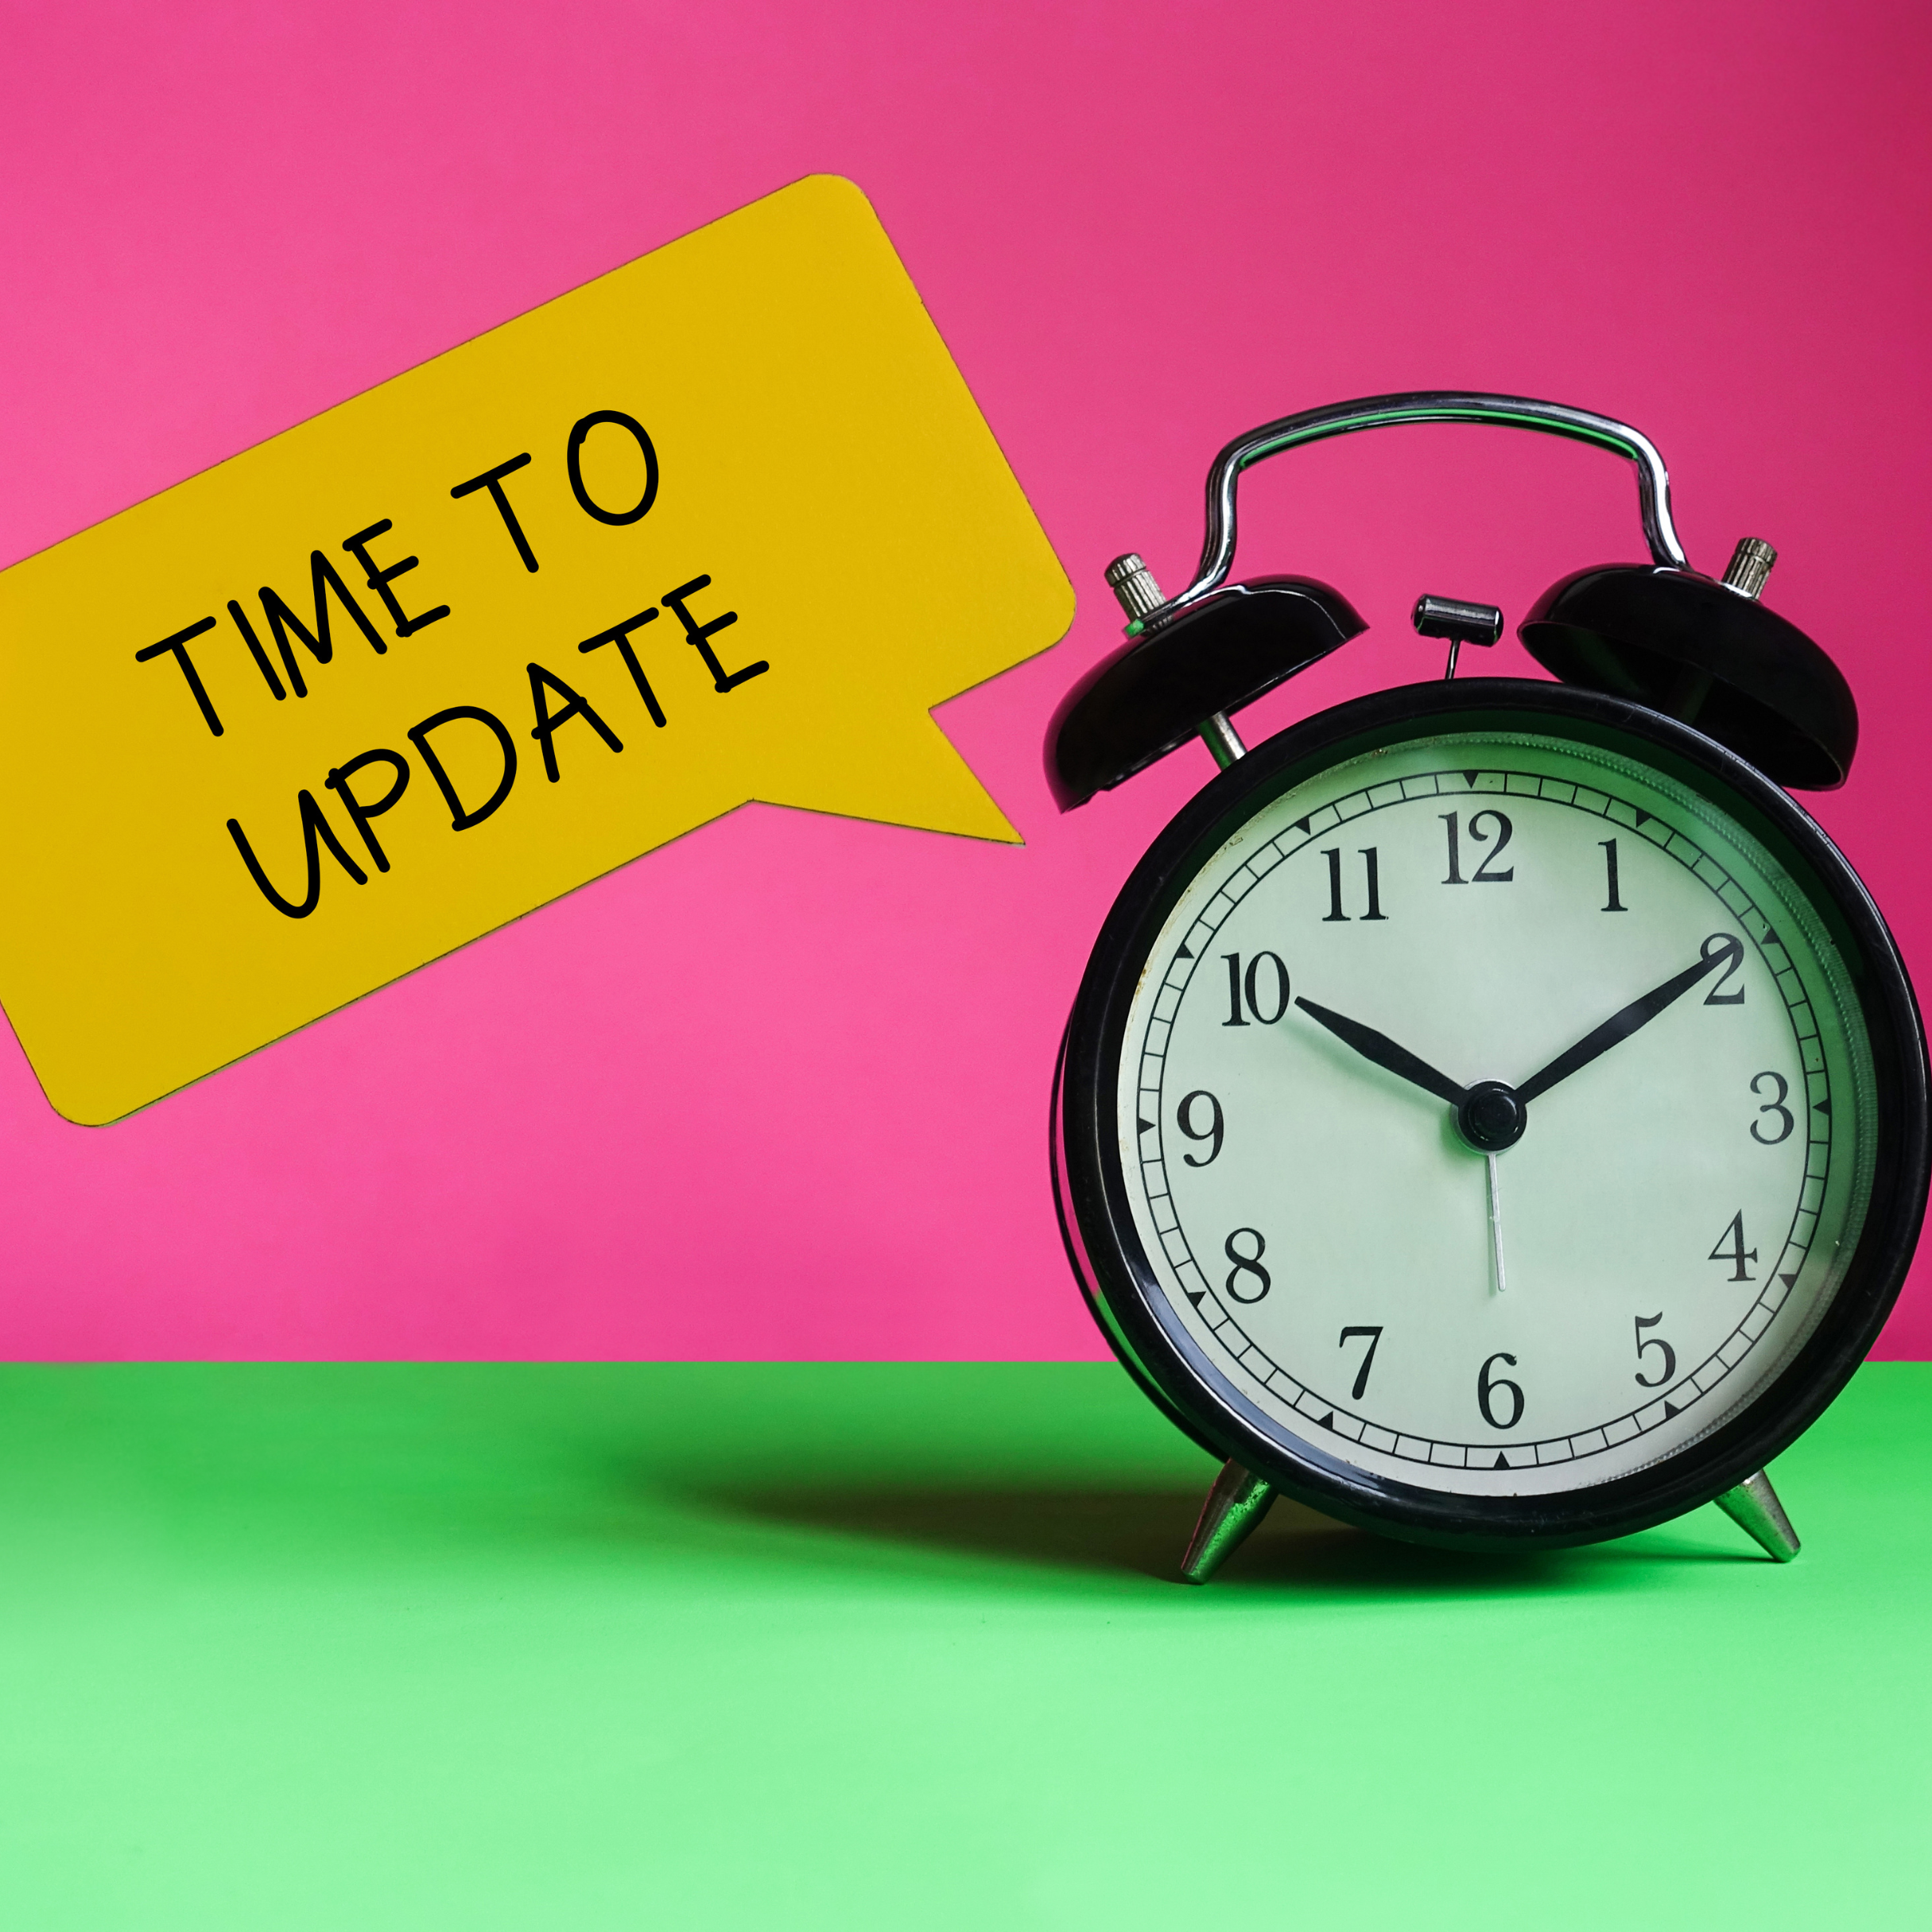 alarm clock on a pink and green background with a speech bubble stating "time to update"